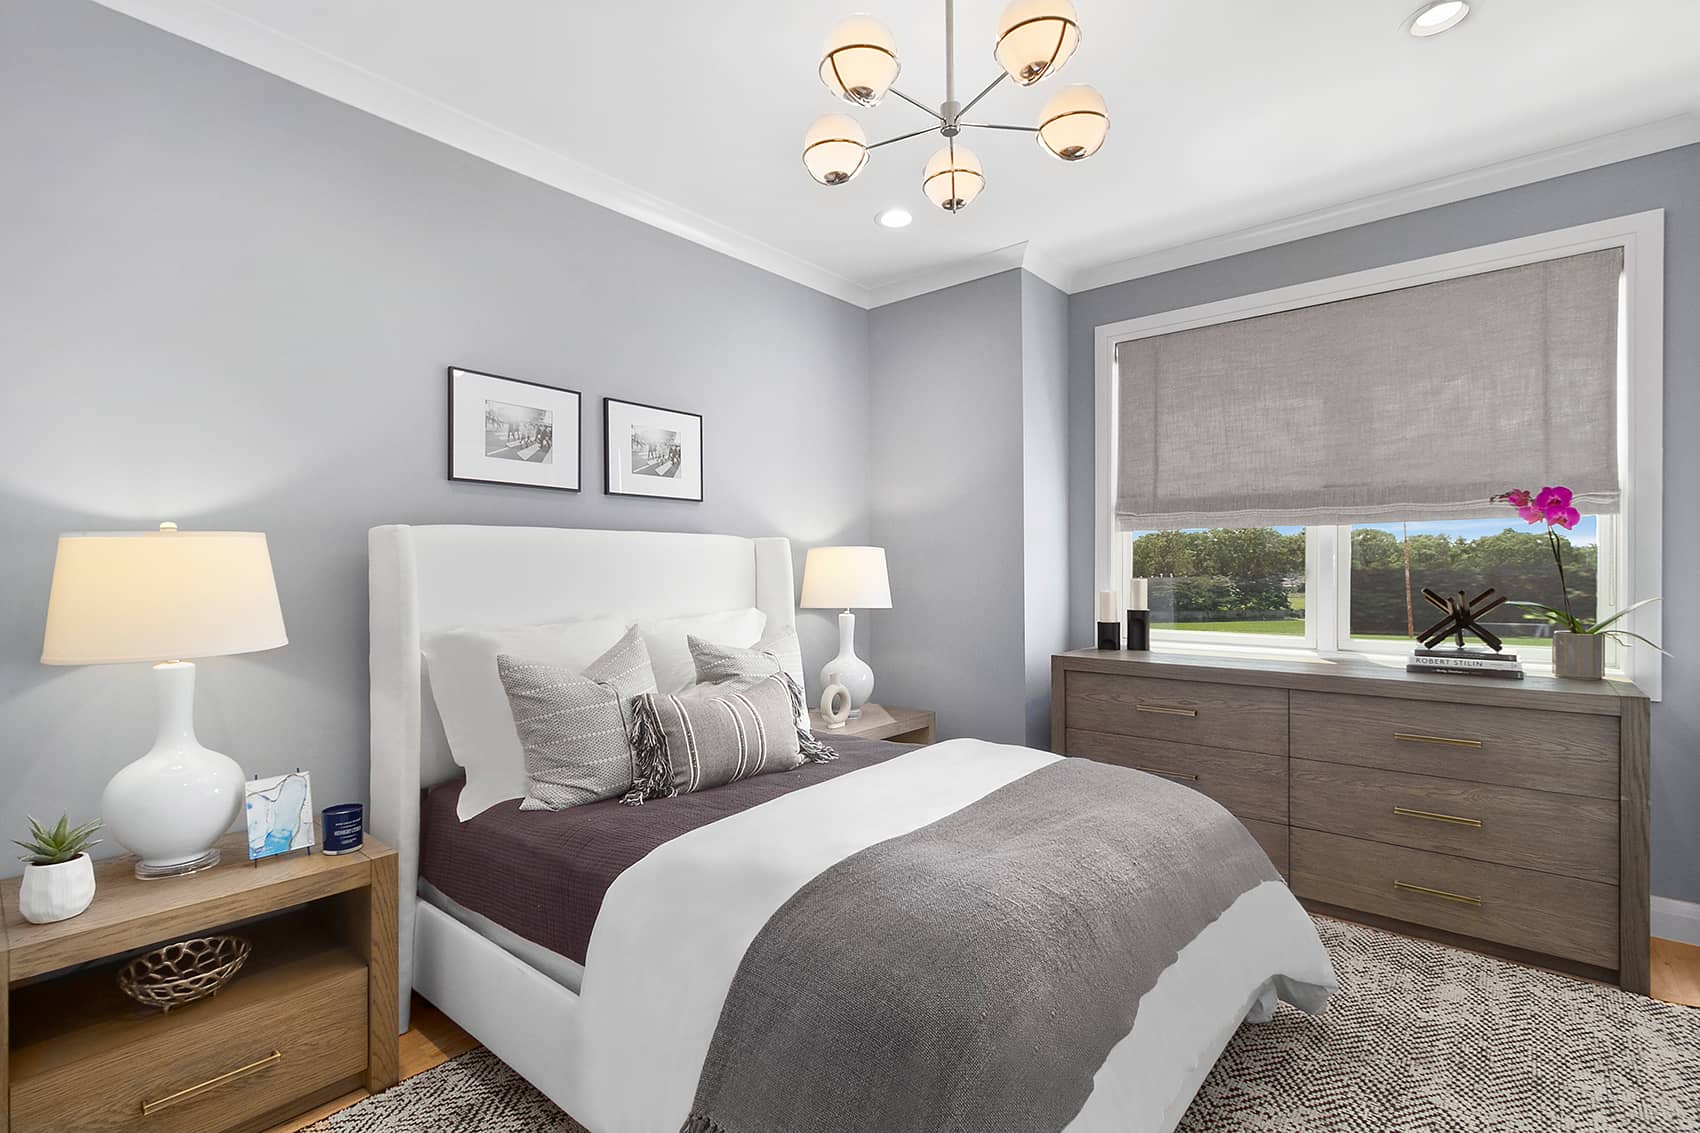 The Barclay at Country Pointe Meadows Yaphank bedroom - View 5, Opens Model Box